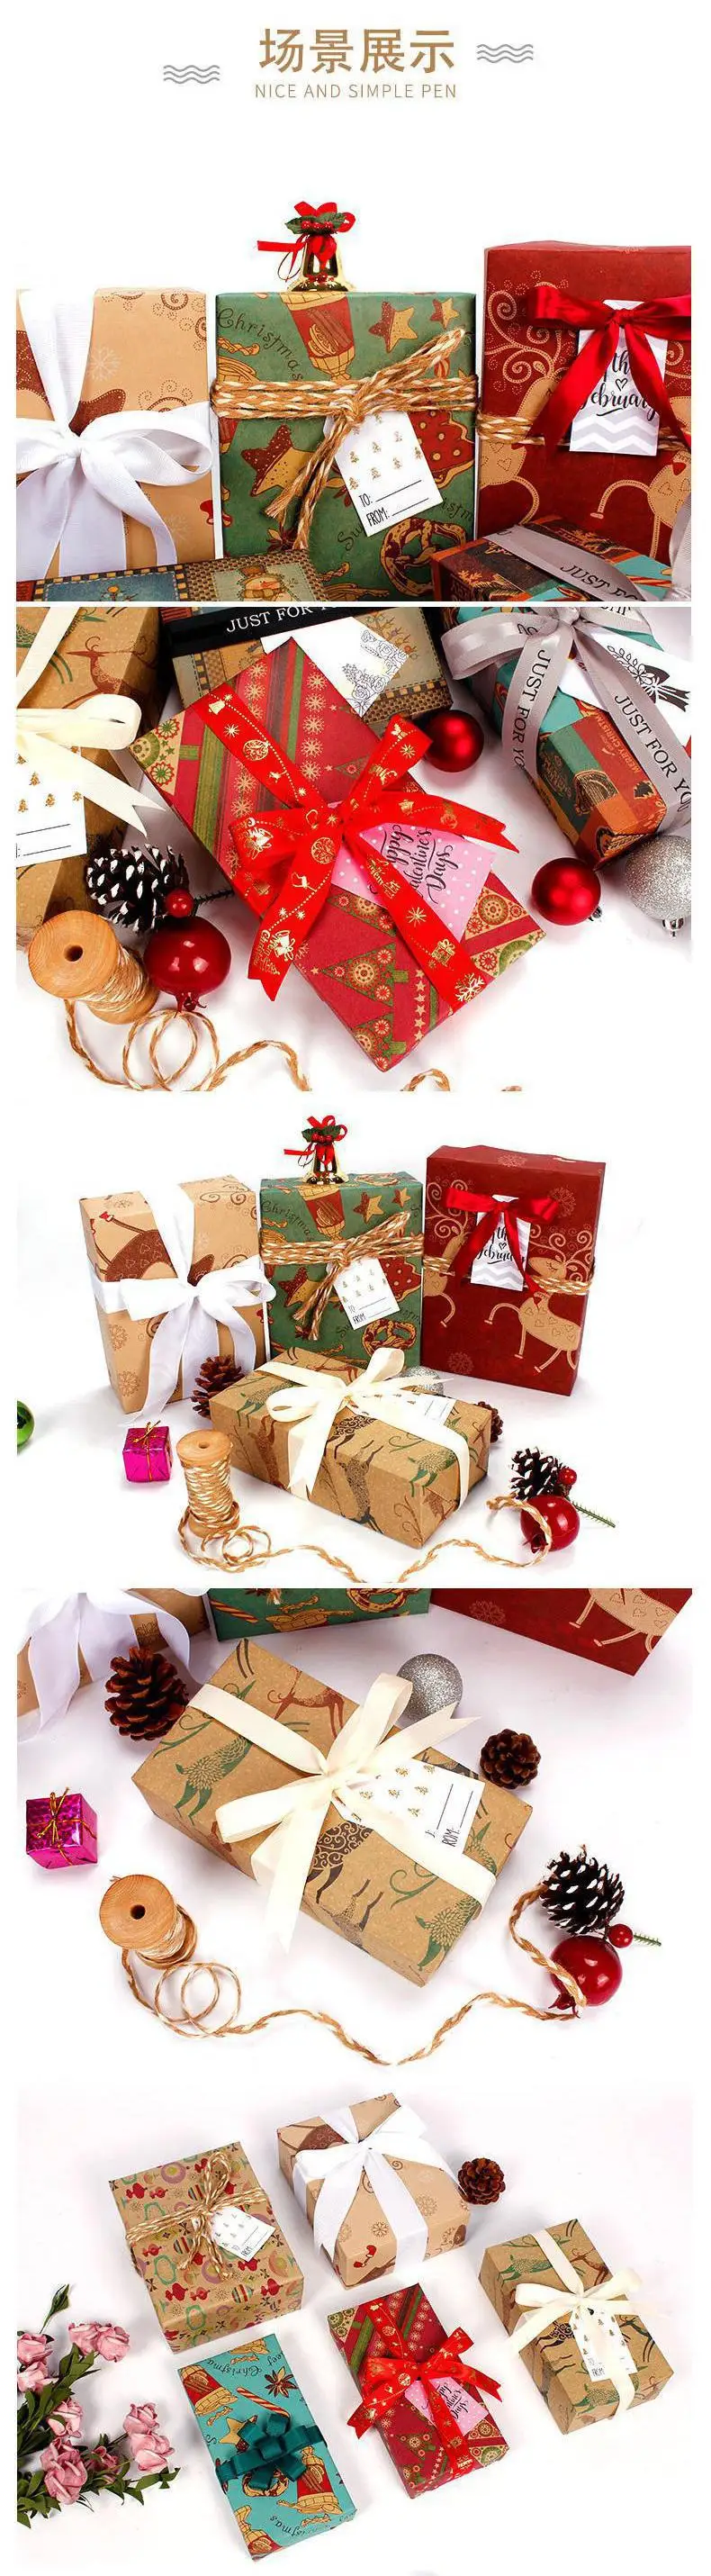 8pcs 50 70cm Christmas Wrapping Paper Wrapping Paper Gift Wrapping